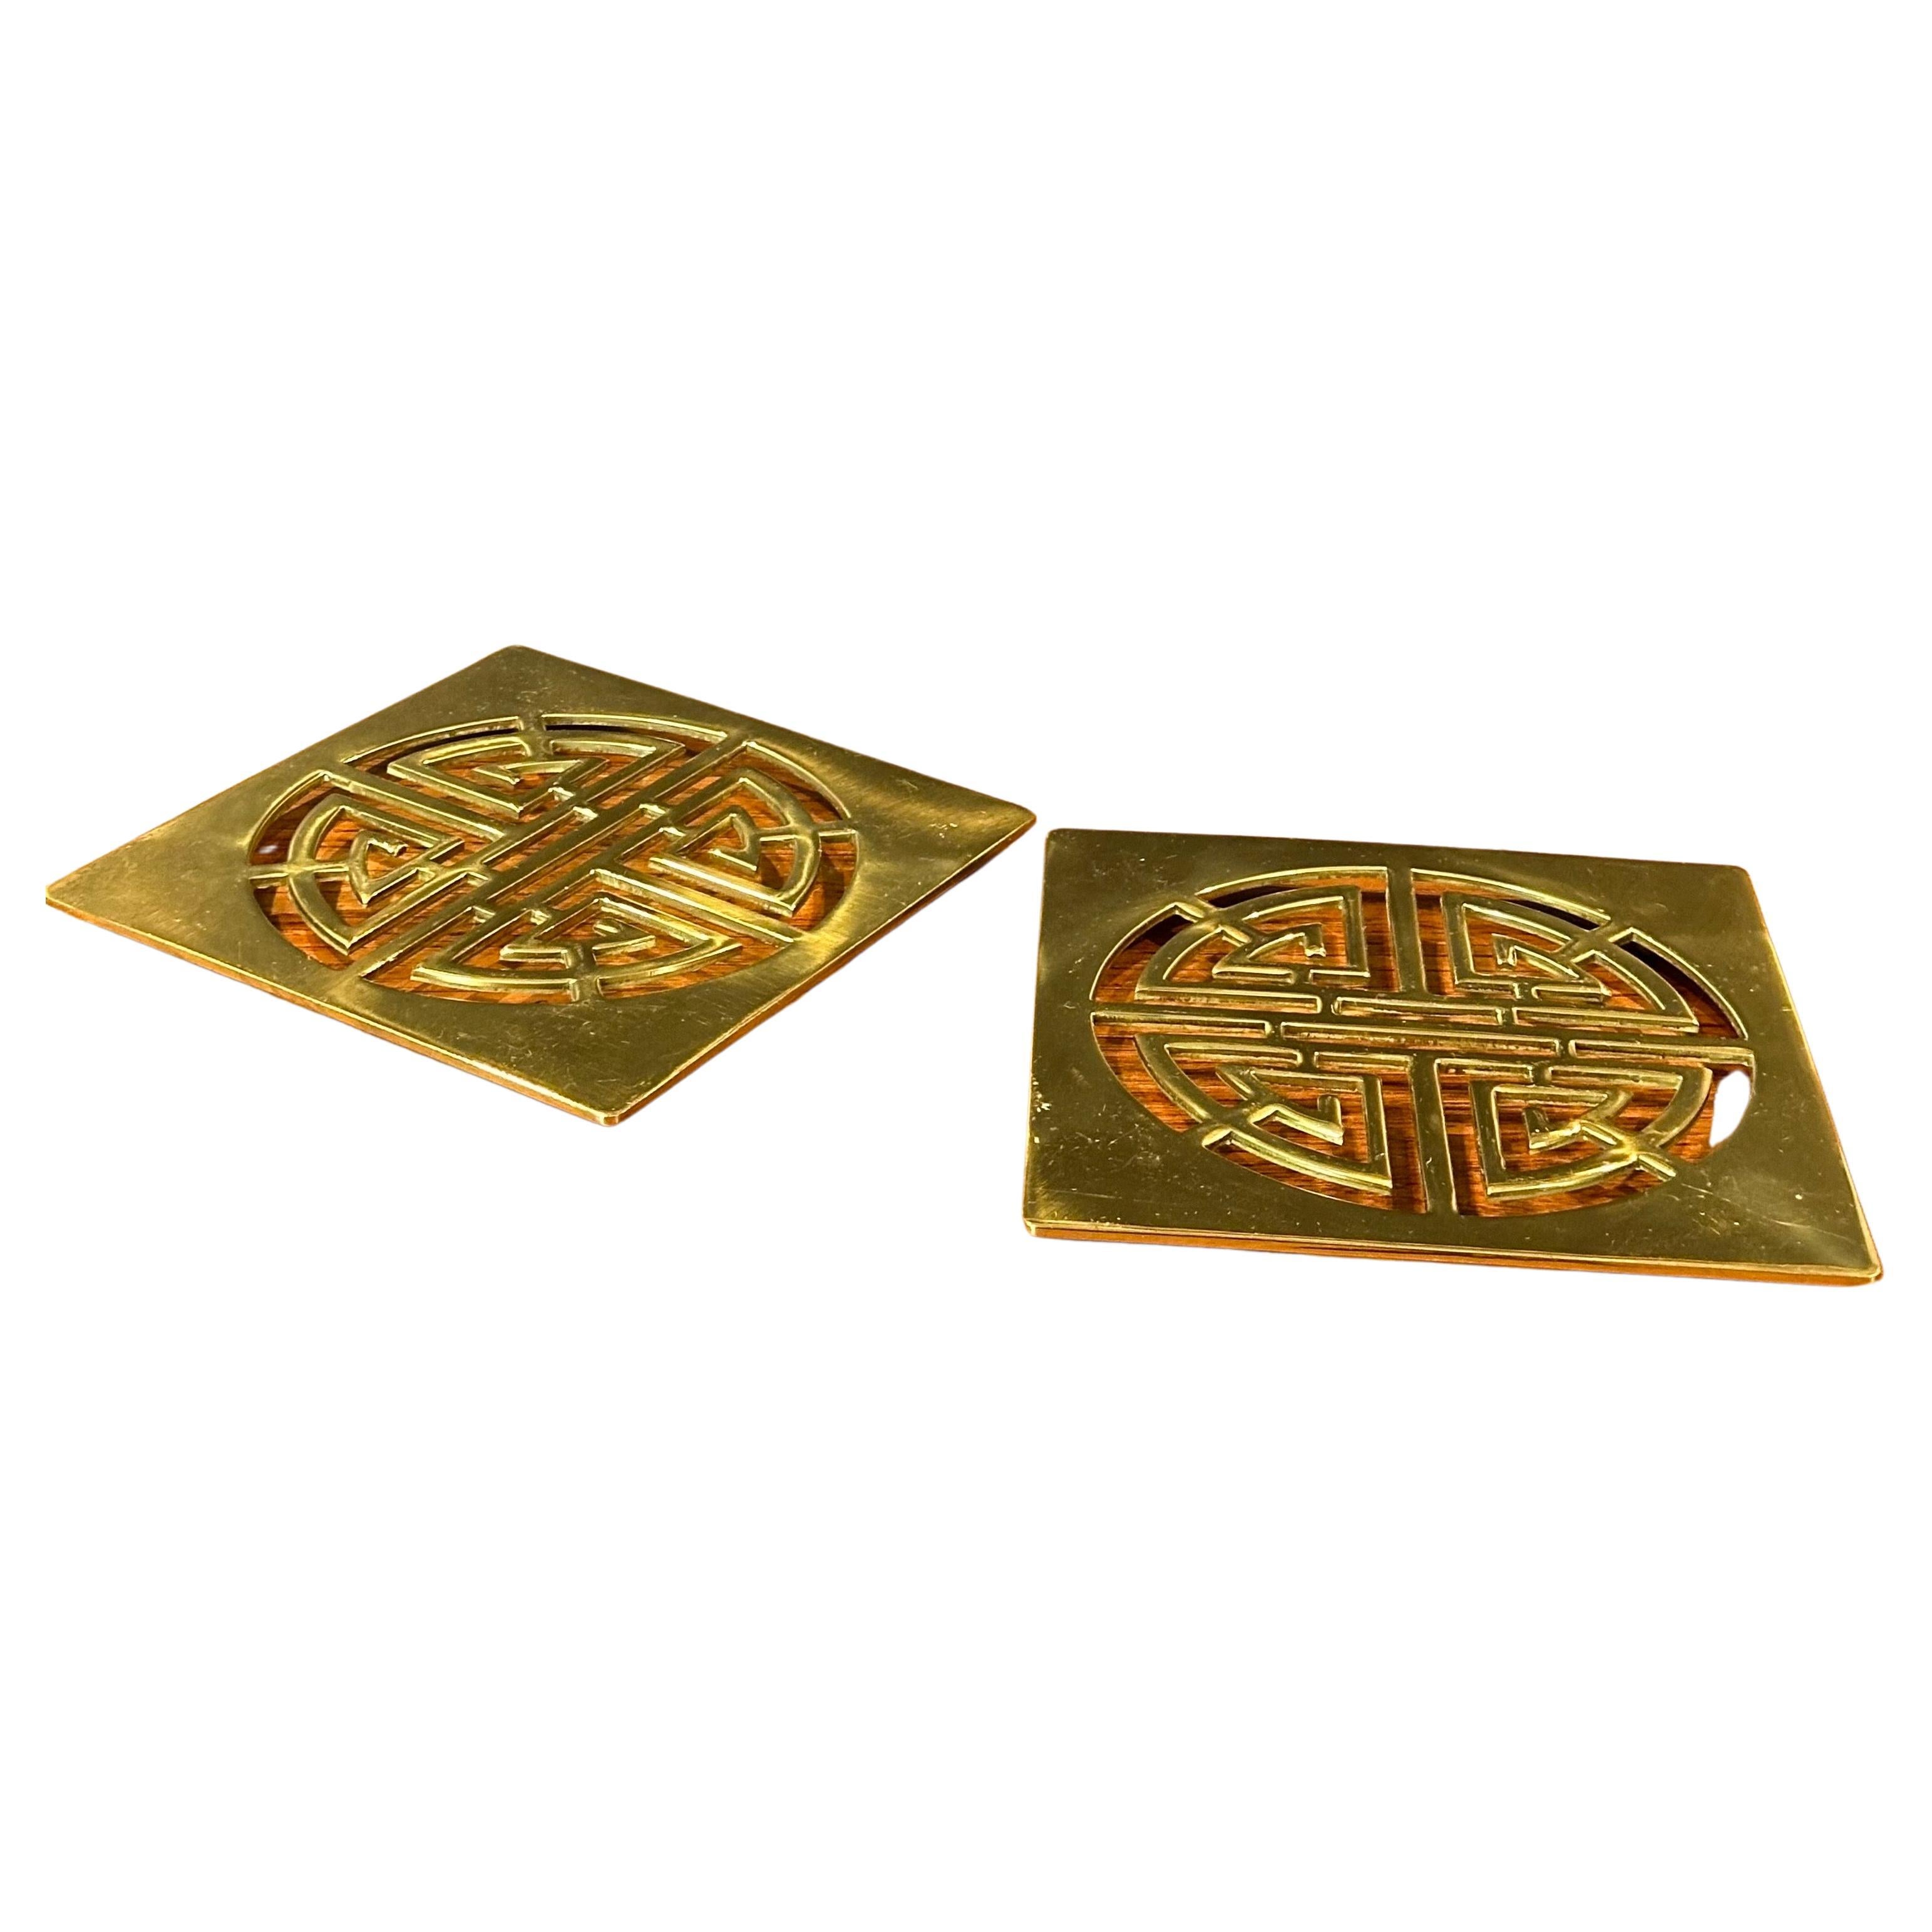 Pair of Asian Style Brass Trivets by Gumps In Good Condition For Sale In San Diego, CA